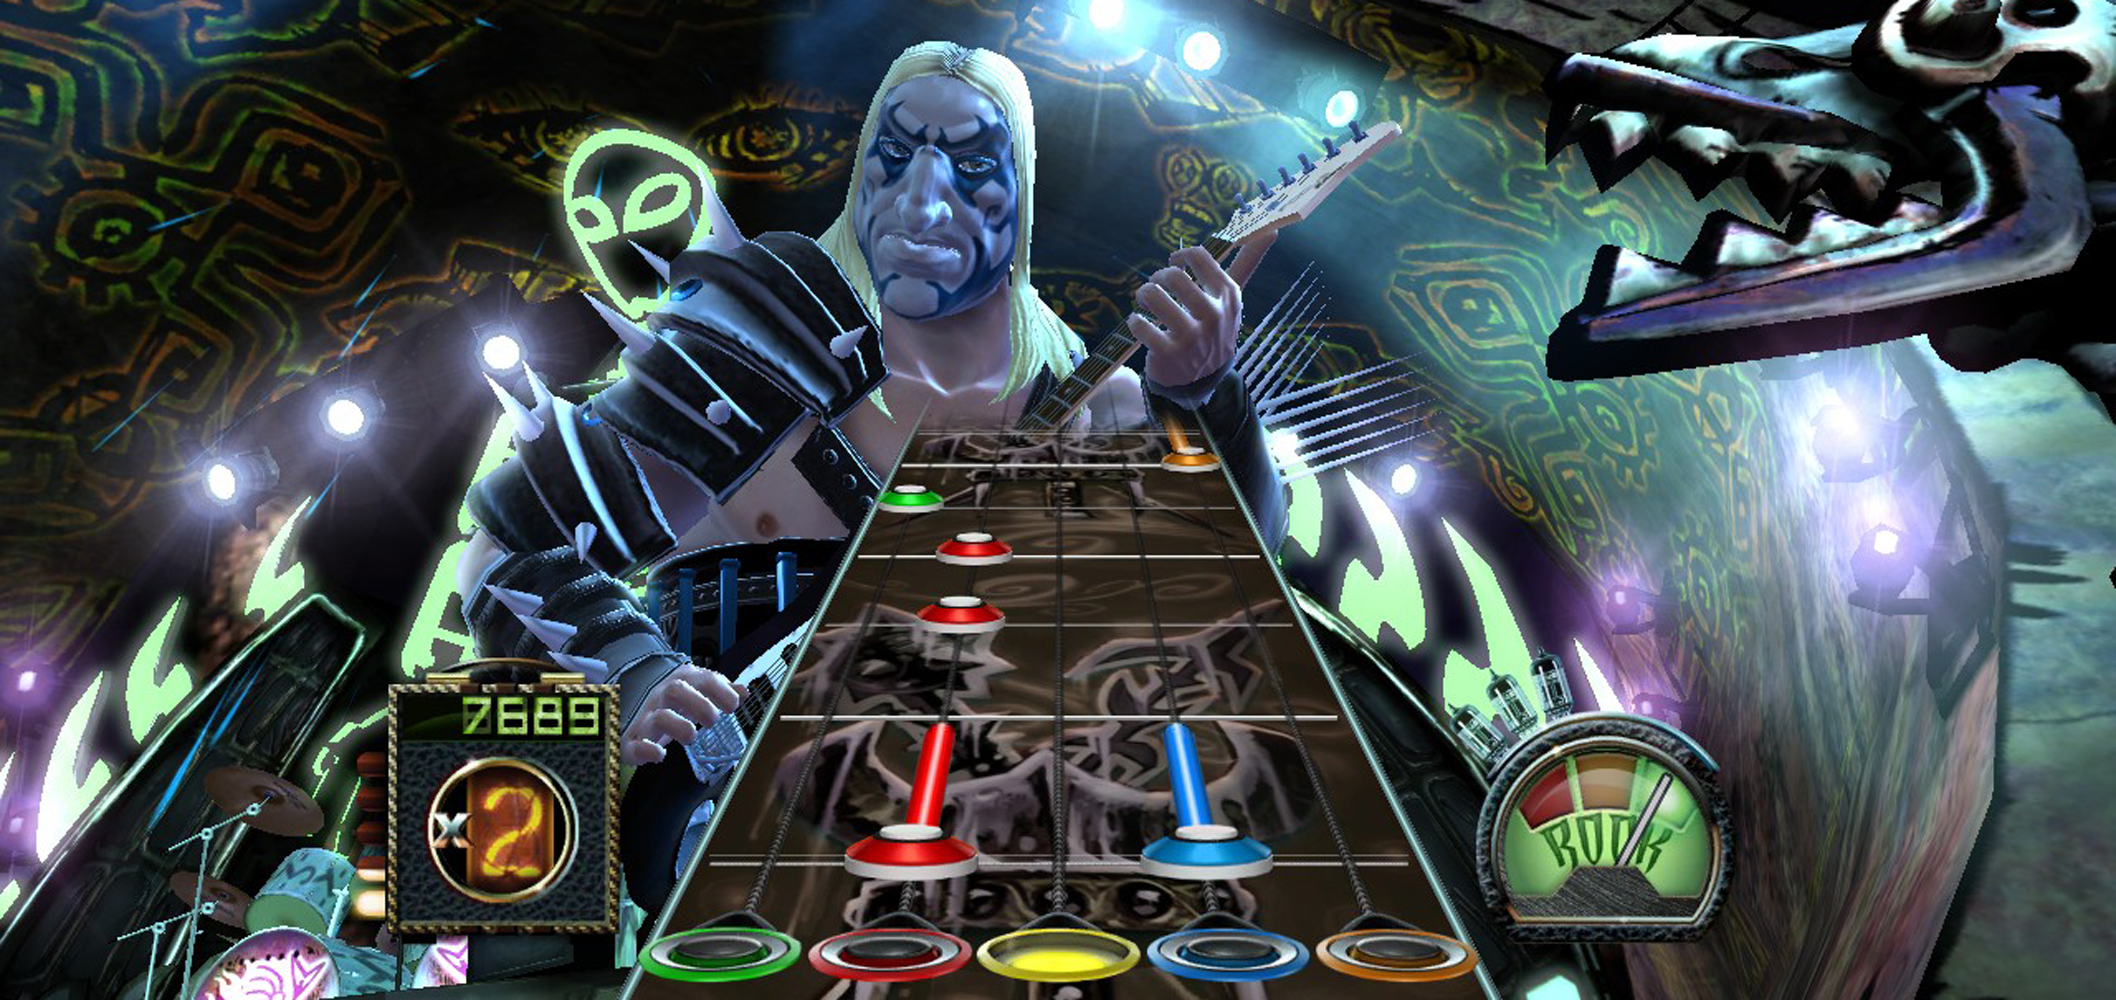 How to Play Guitar Hero 2 with a PS2 Controller: 2 Simple Steps